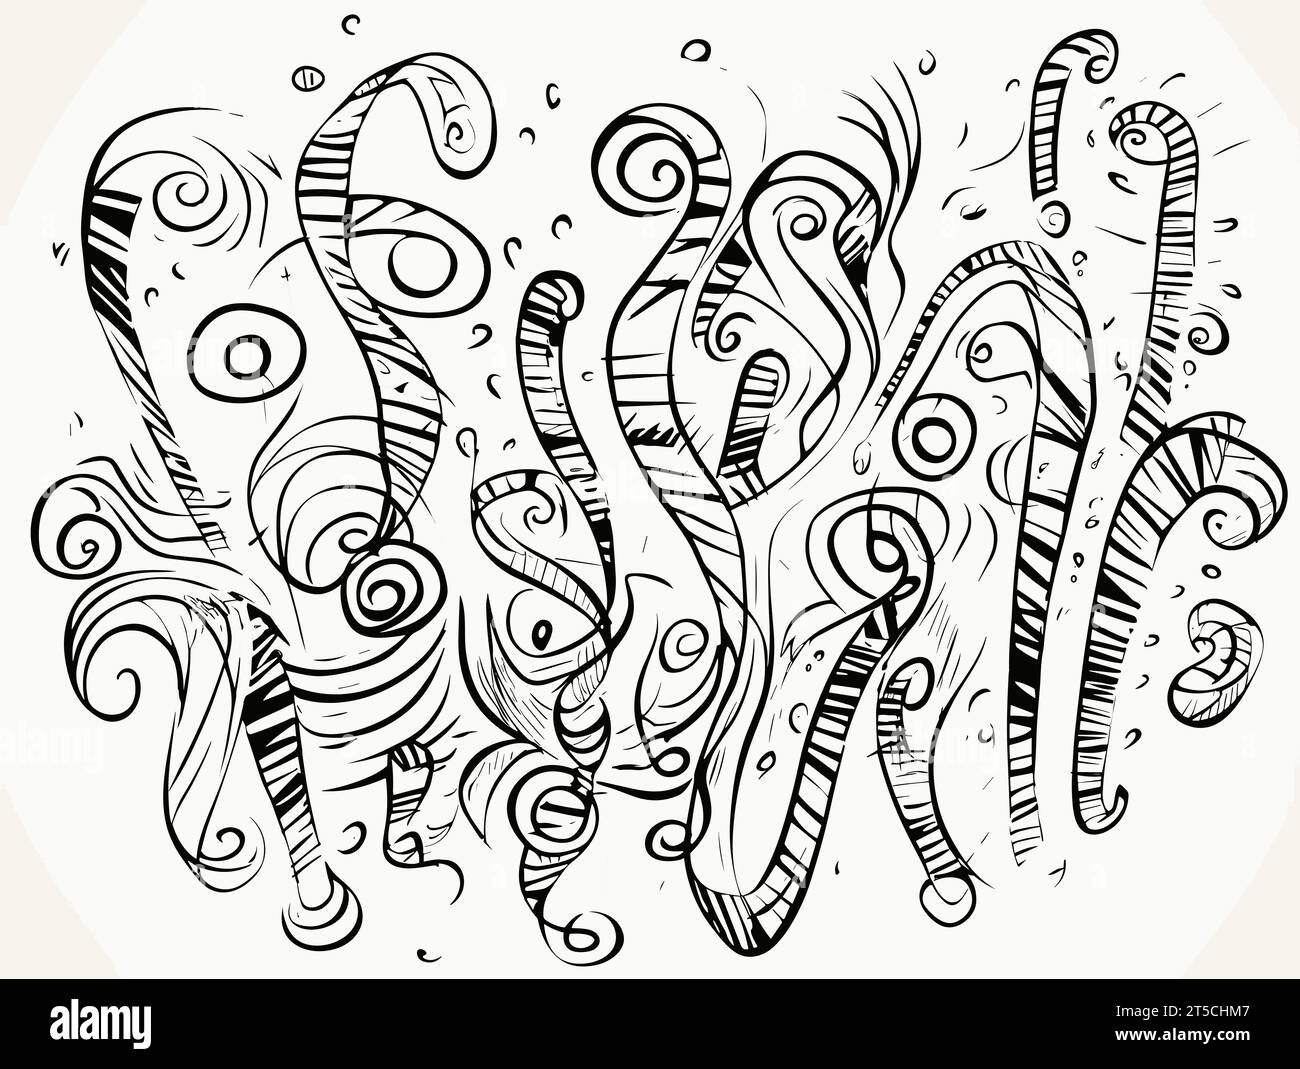 Drawing of question mark and exclamation point. doodle illustration separated, sweeping overdrawn lines. Stock Vector